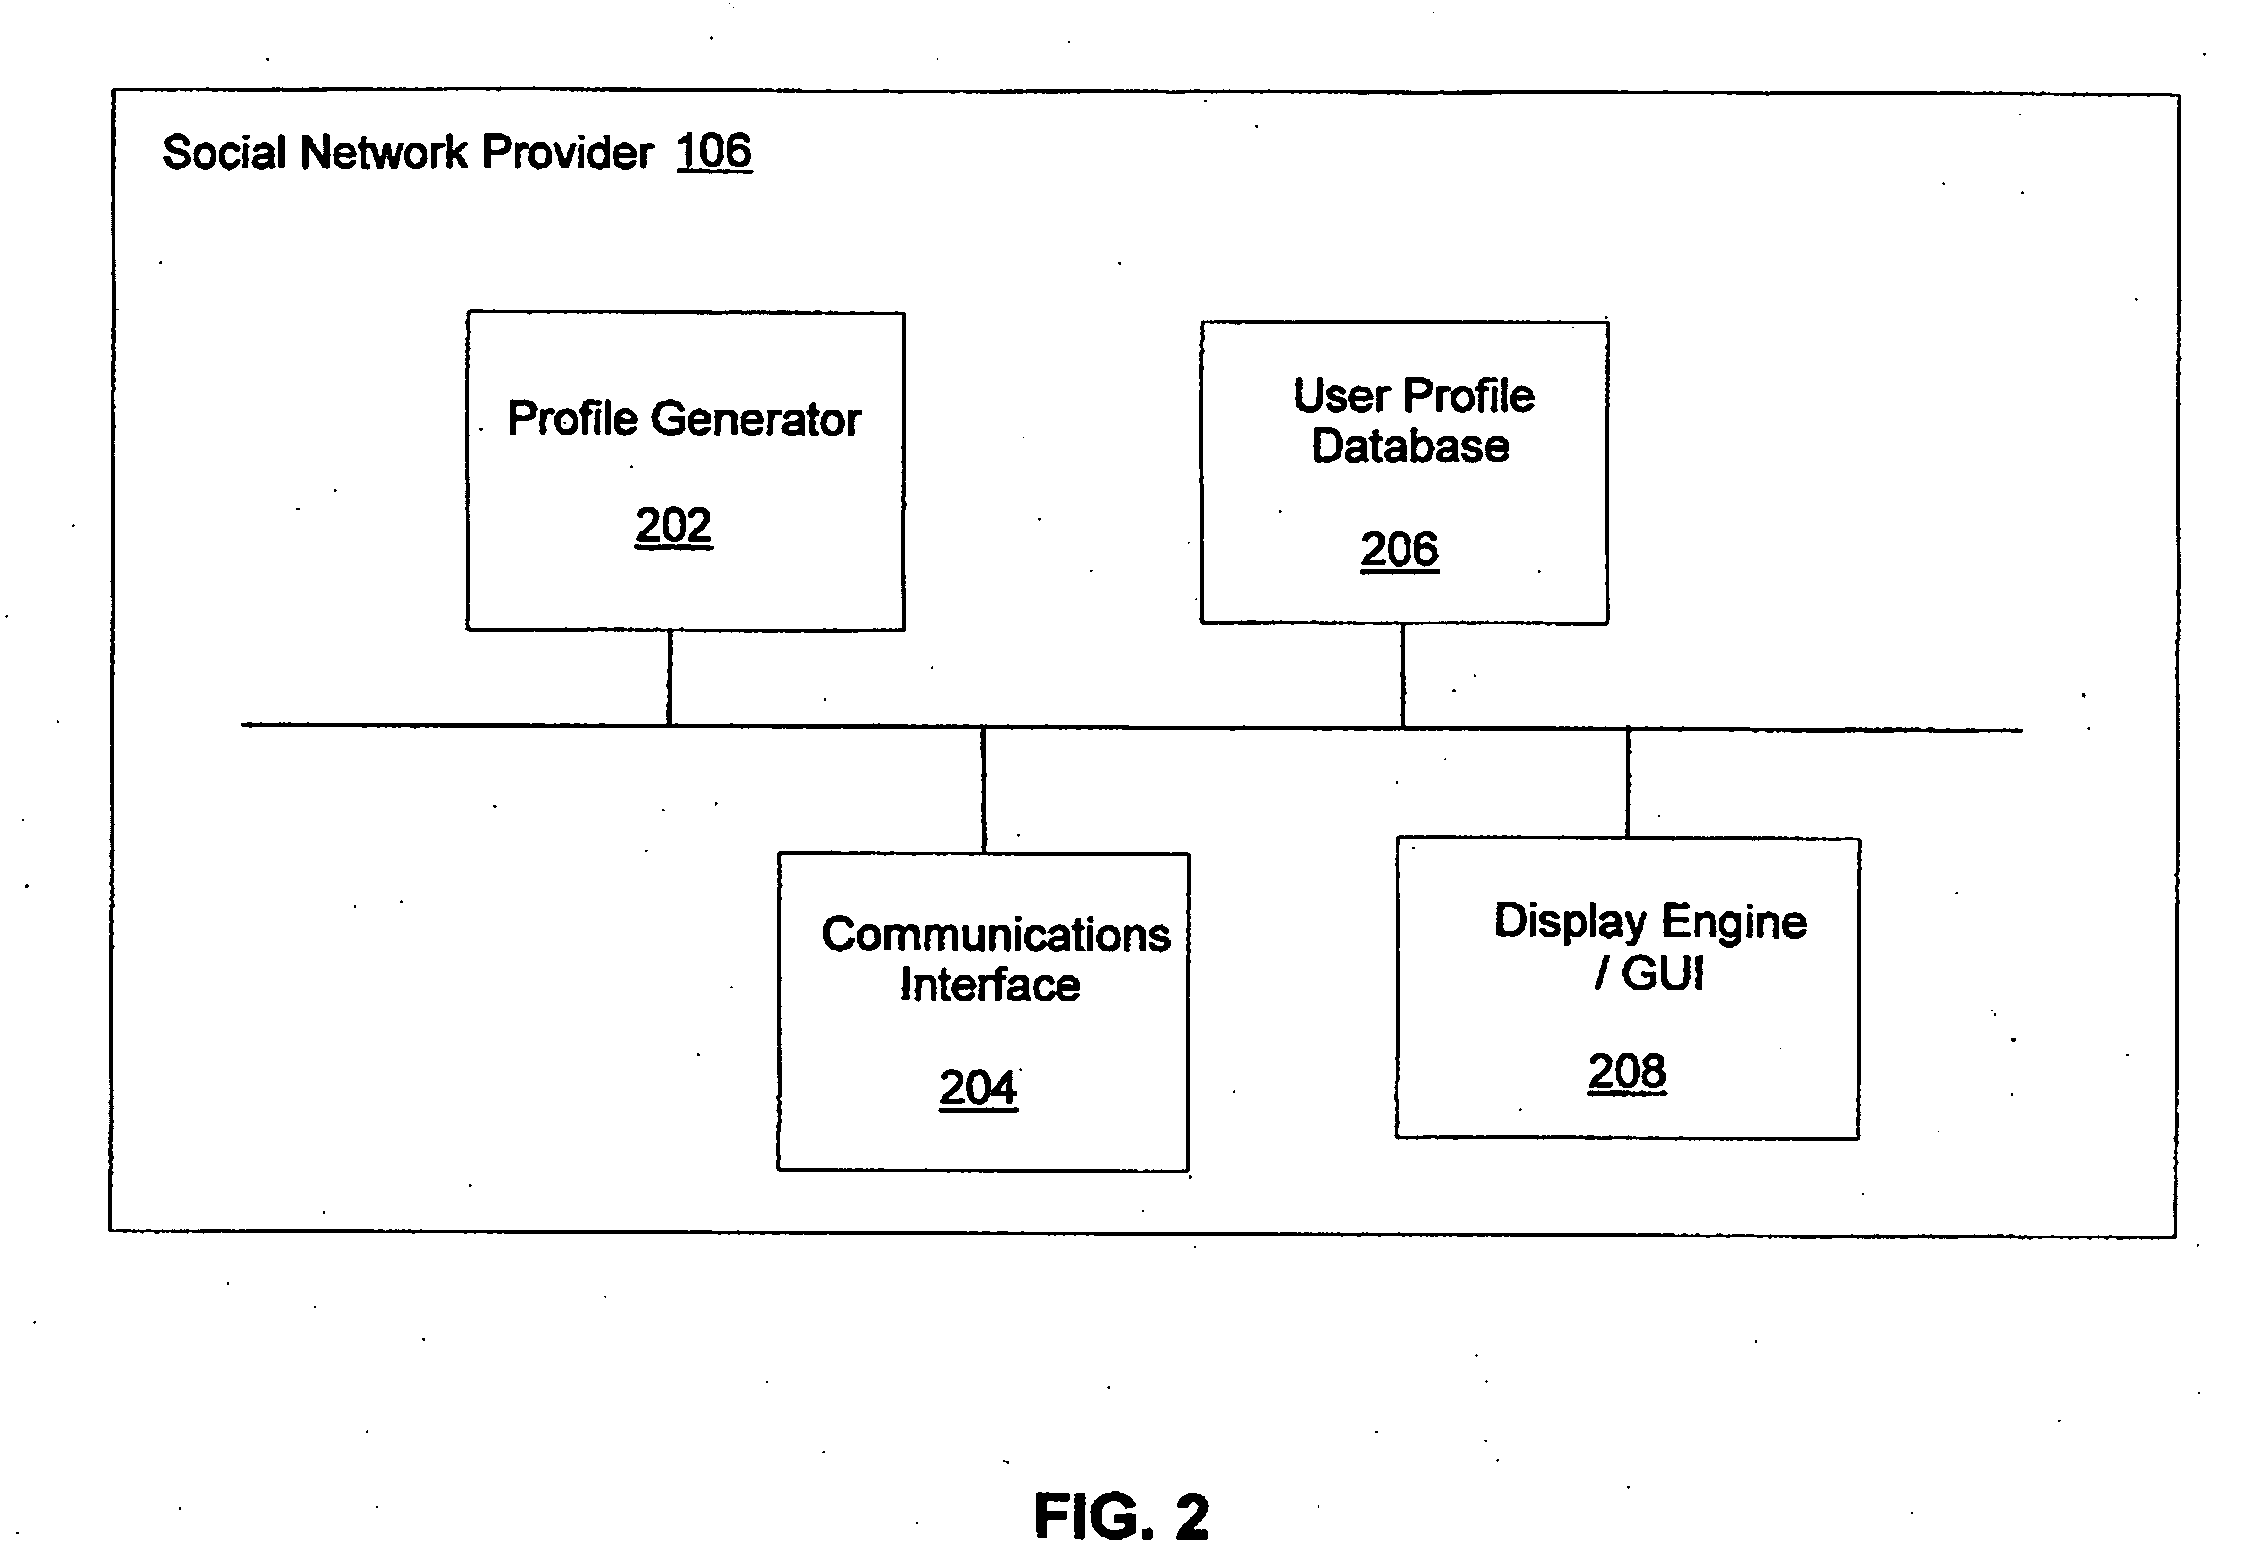 Systems and methods for providing dynamically selected media content to a user of an electronic device in a social network environment